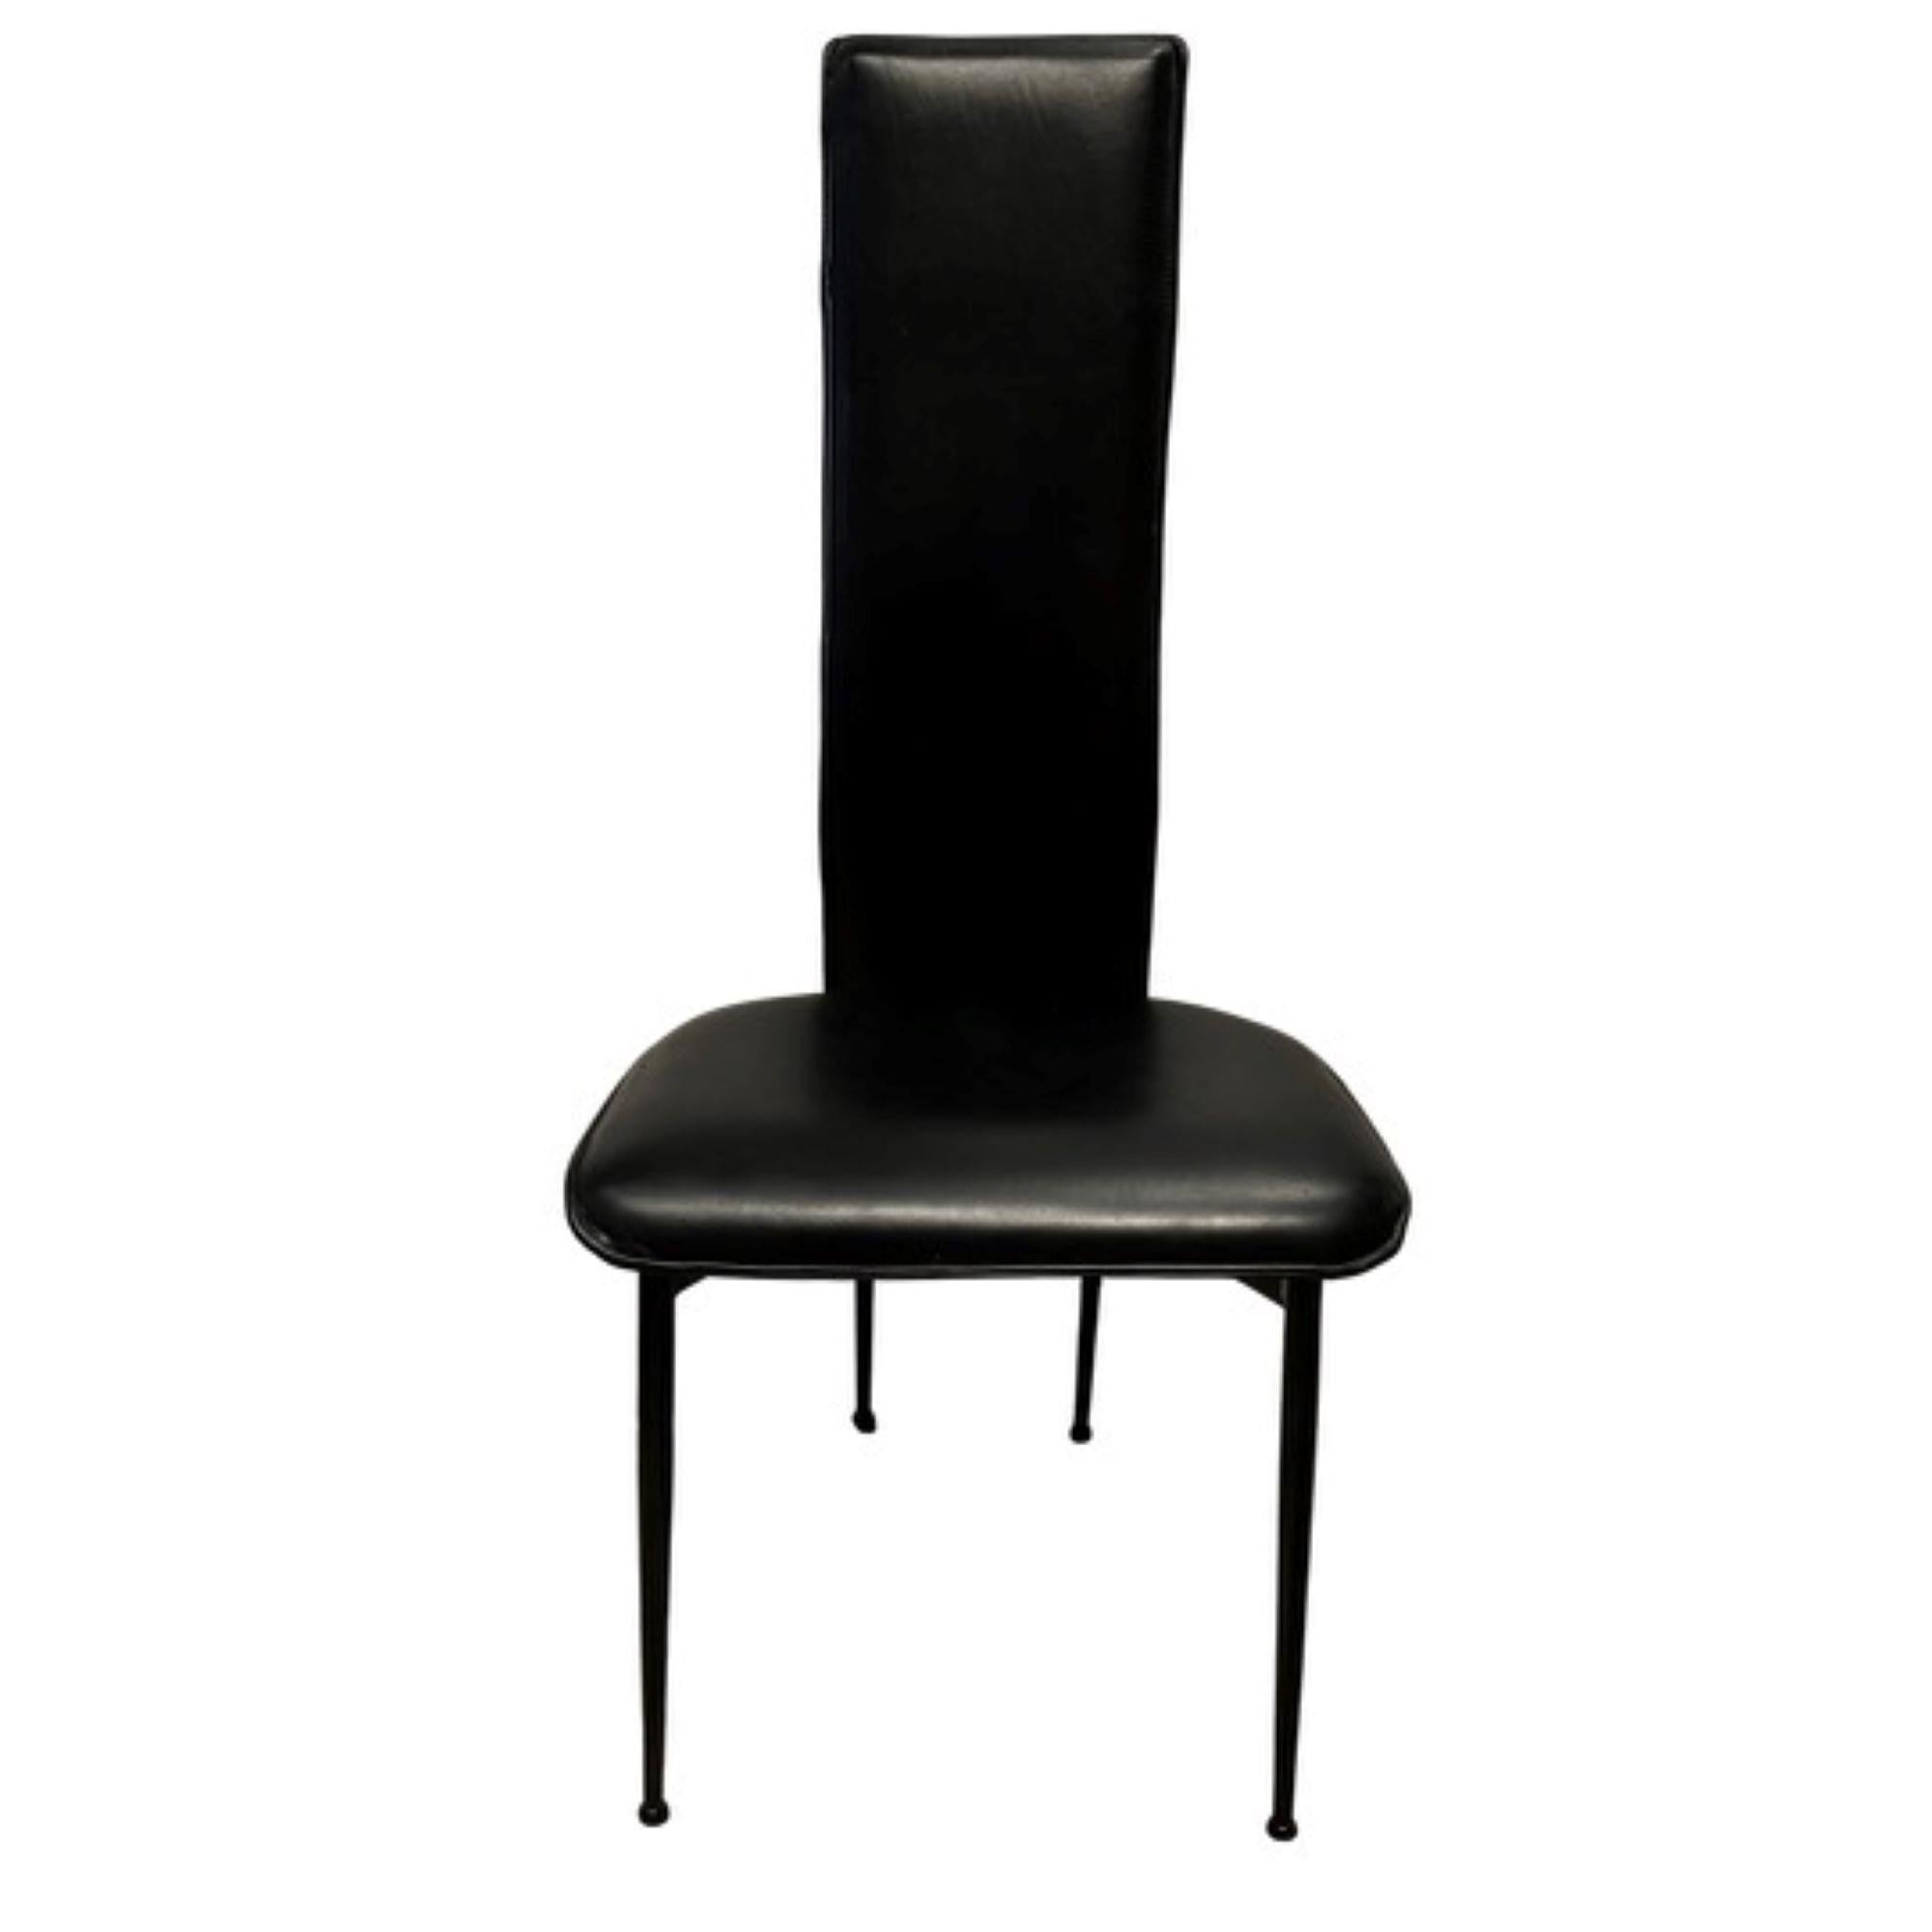 Giancarlo Vegni for Fasem International.
Set of 6 Black Leather Dining Chairs with Black Metal Hardware.
Made in Italy
1980's
2 Chairs with Arm Rests
4 Chairs without Arm Rests
Mid-Century Modern

Giancarlo Vegni was born in 1949. He studied